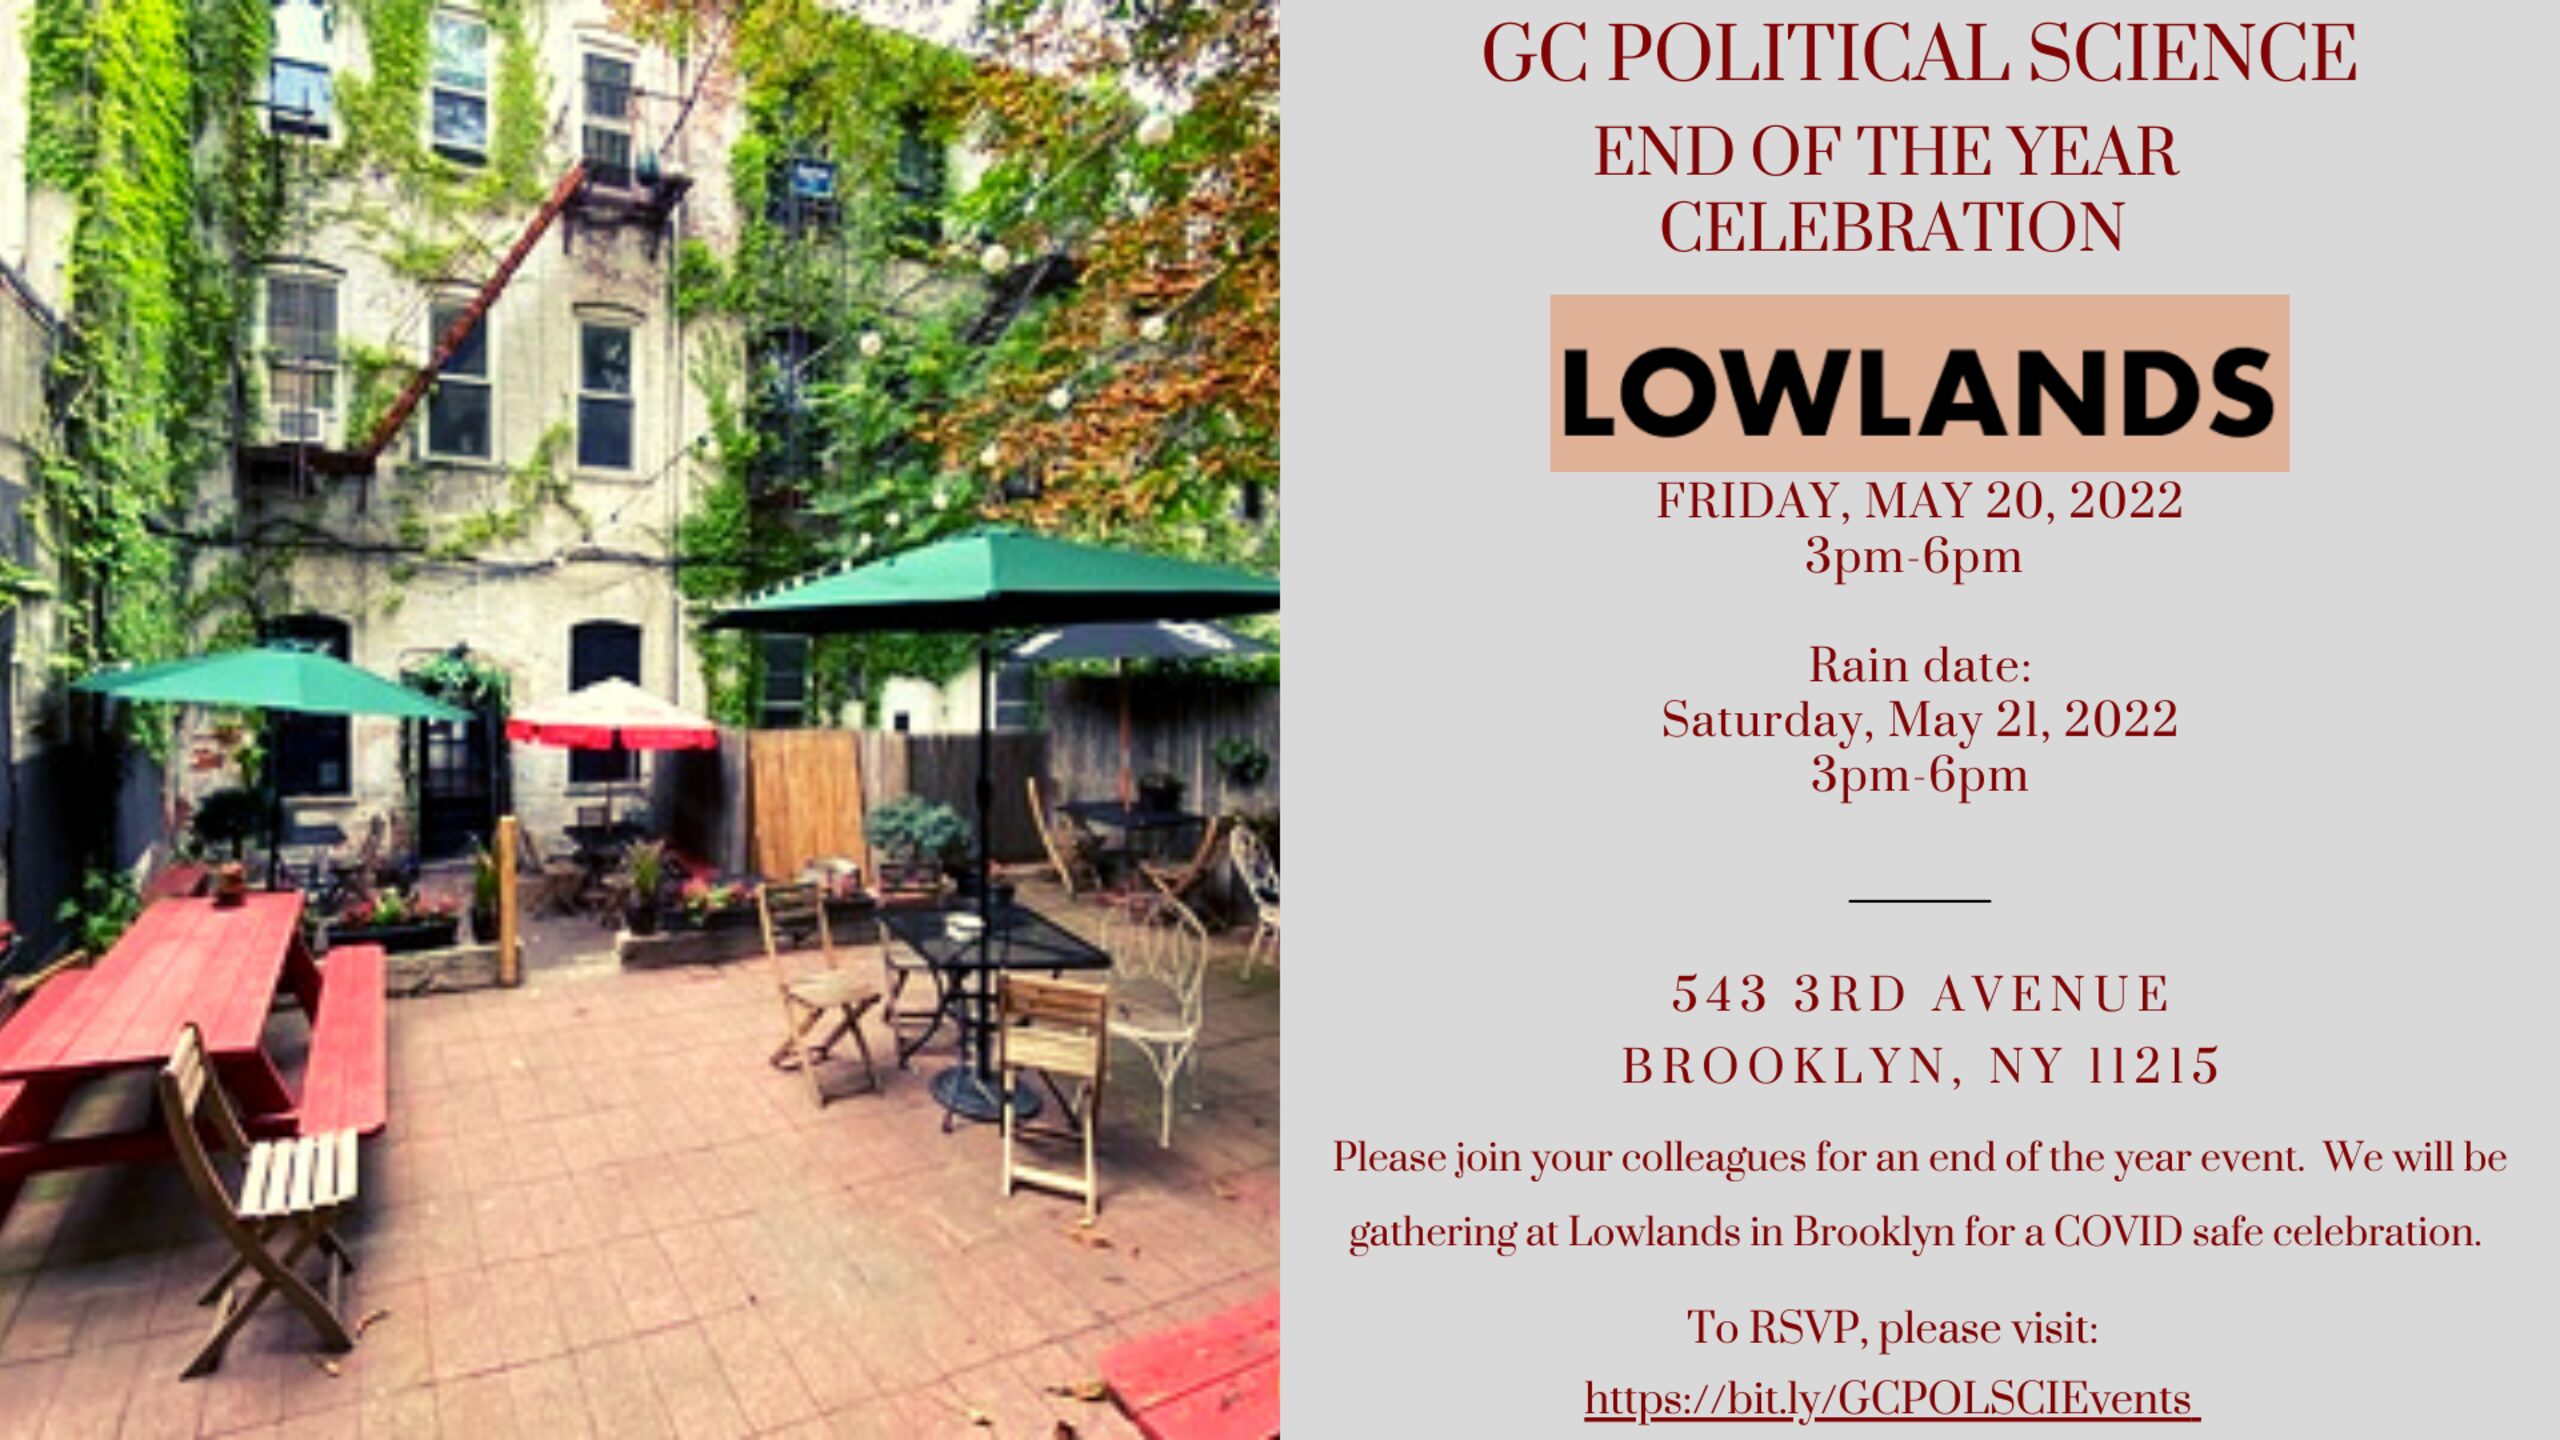 End-of-Year Celebration, Friday, May 20, 3:00-6:00pm, Lowlands, BK